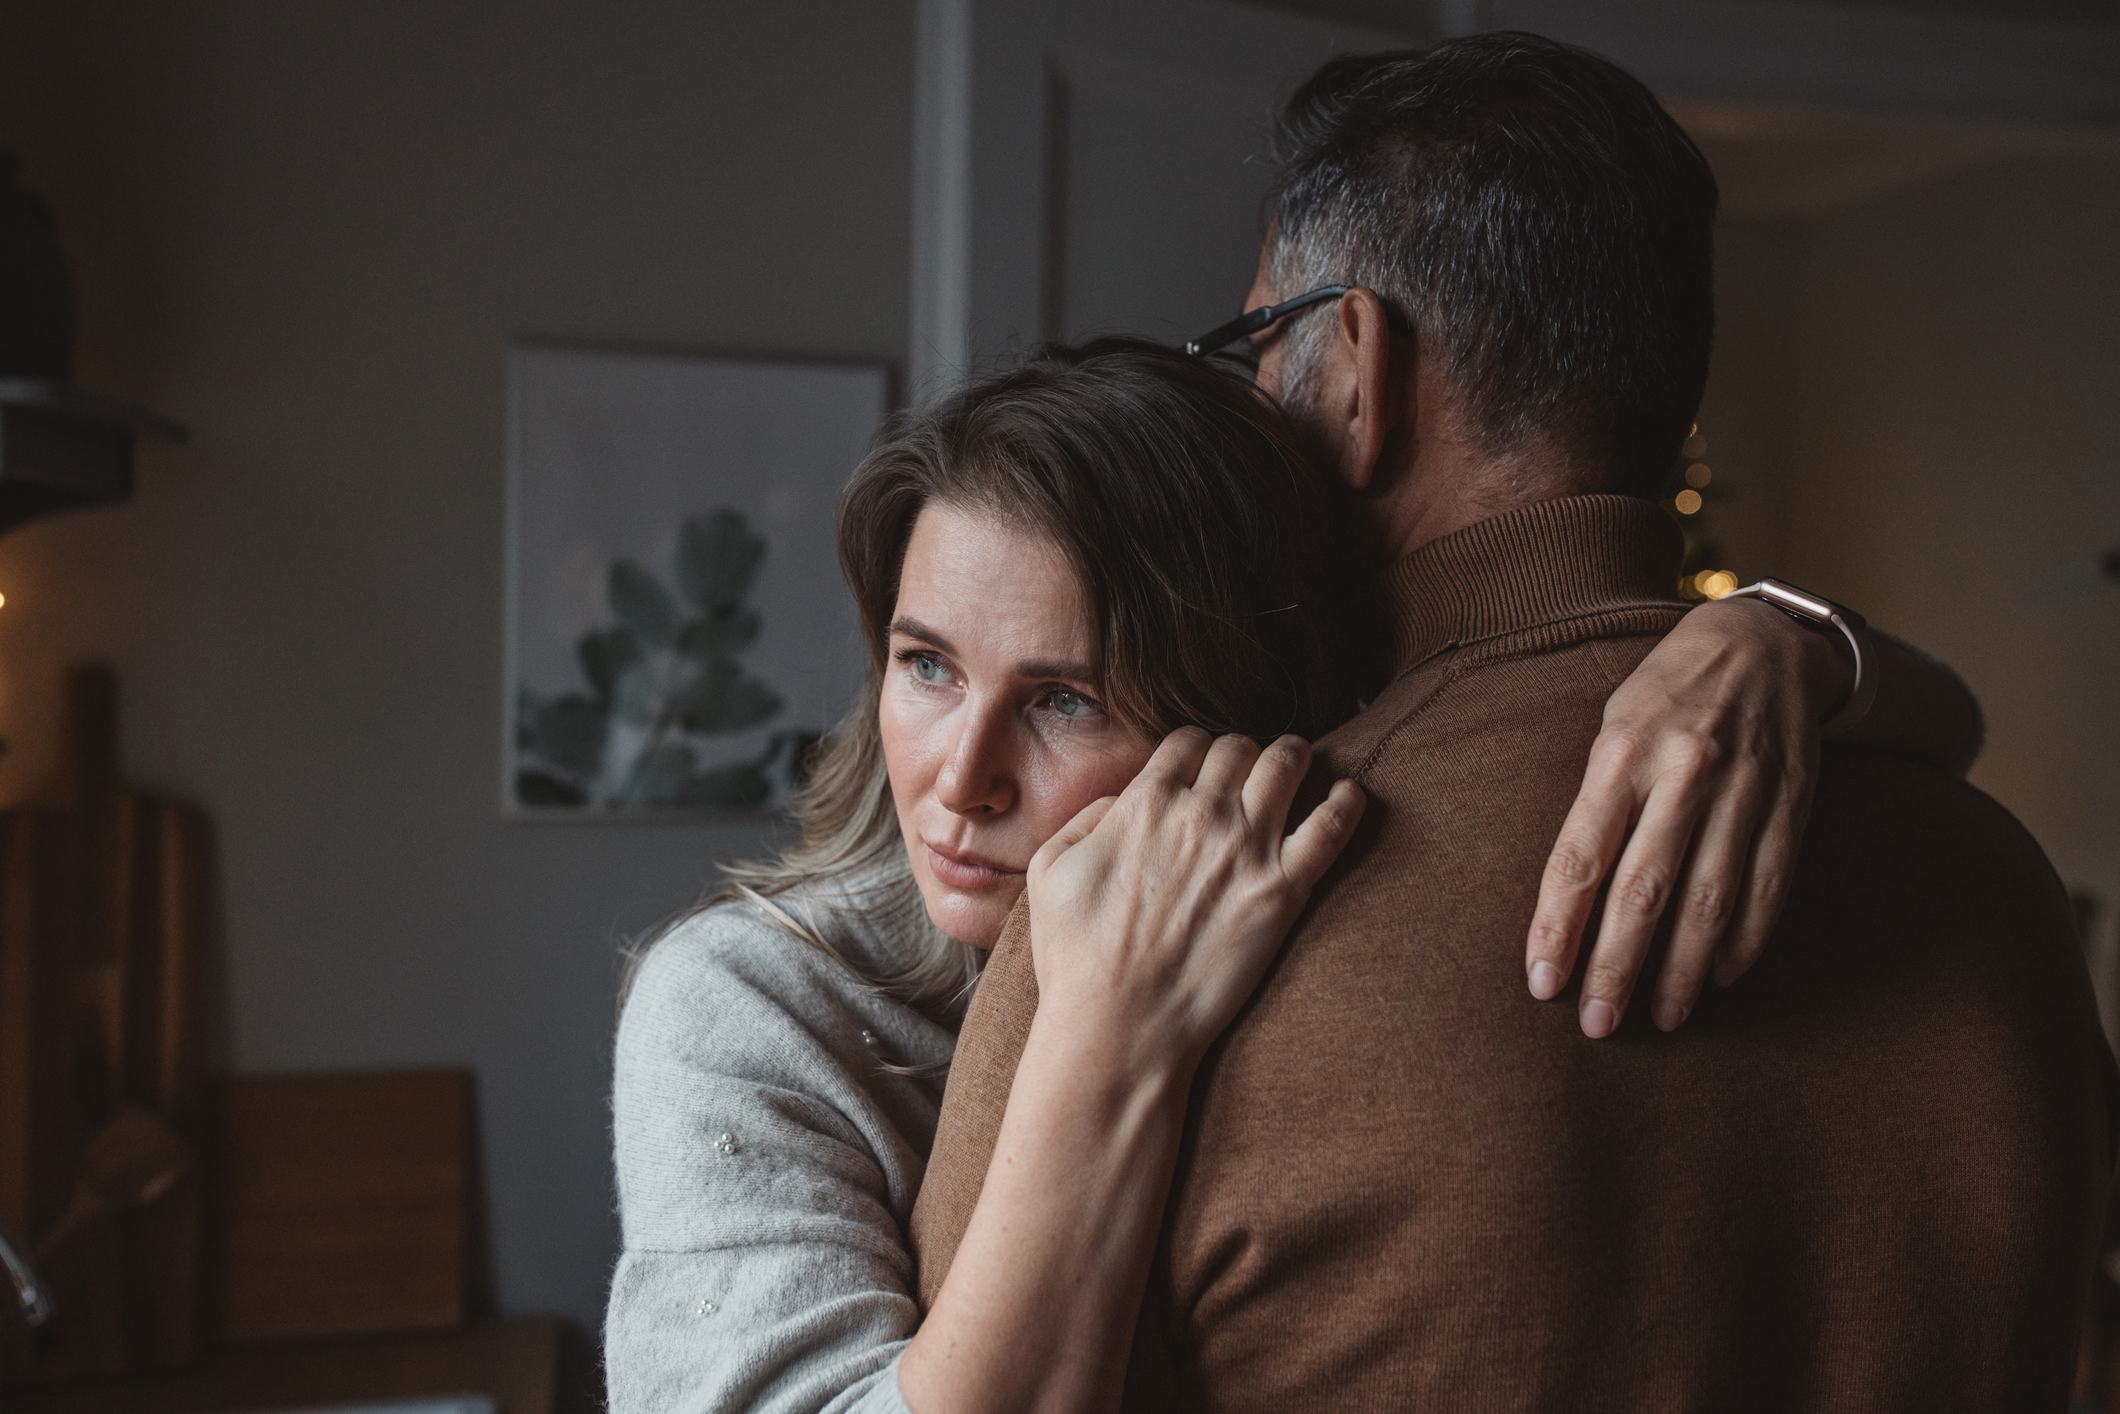 A woman is looking pensive while hugging her husband